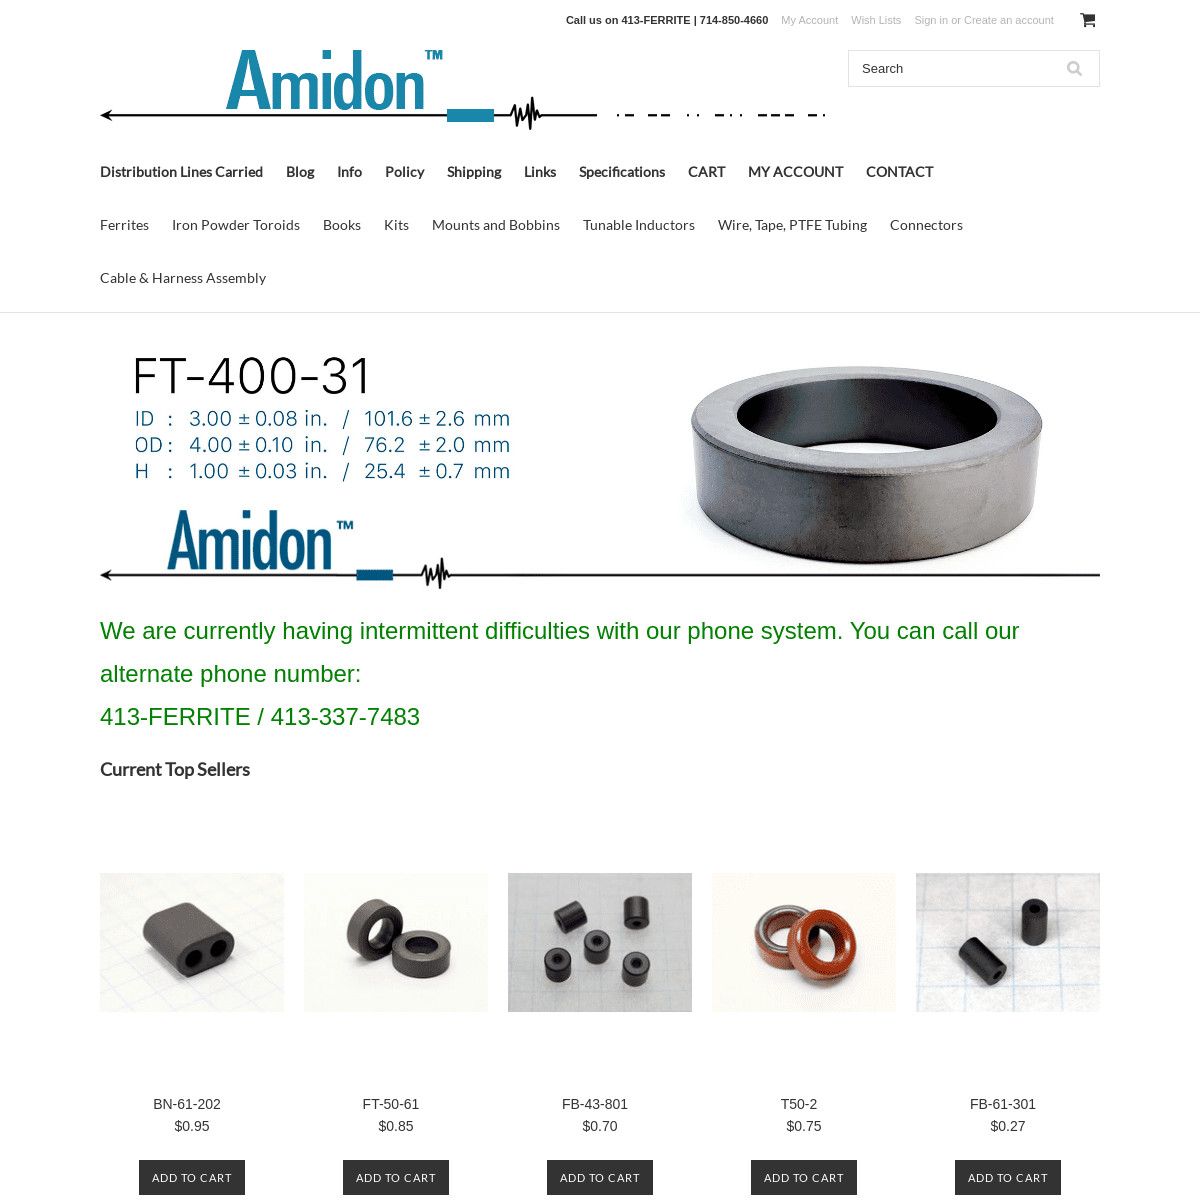 A complete backup of https://amidoncorp.com